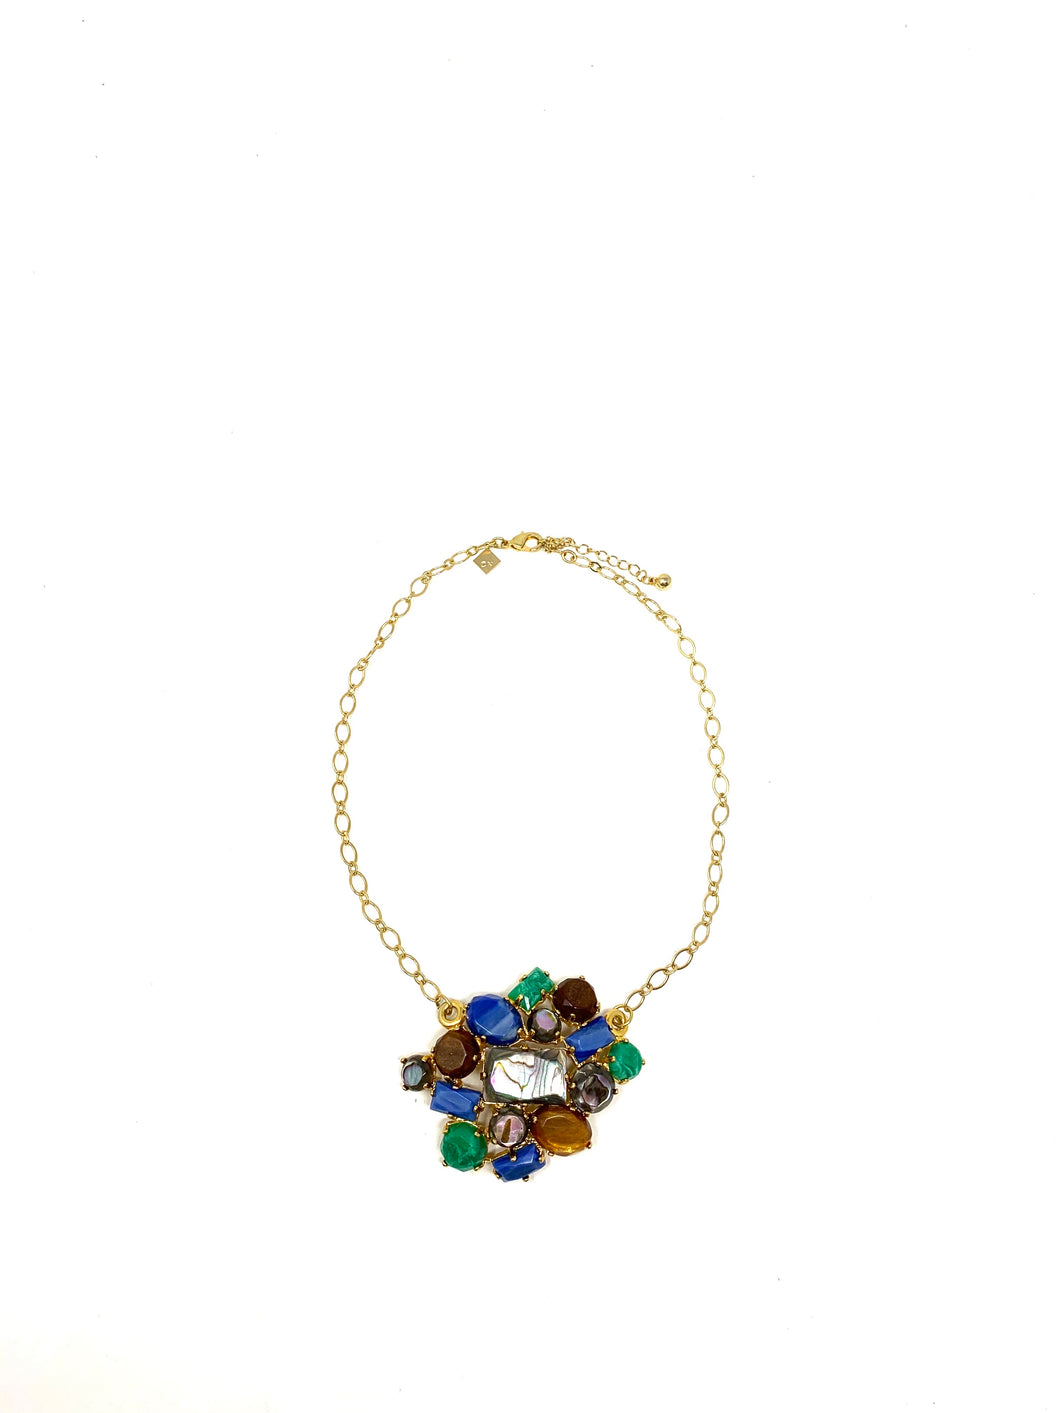 Ocean Colored Statement Necklace